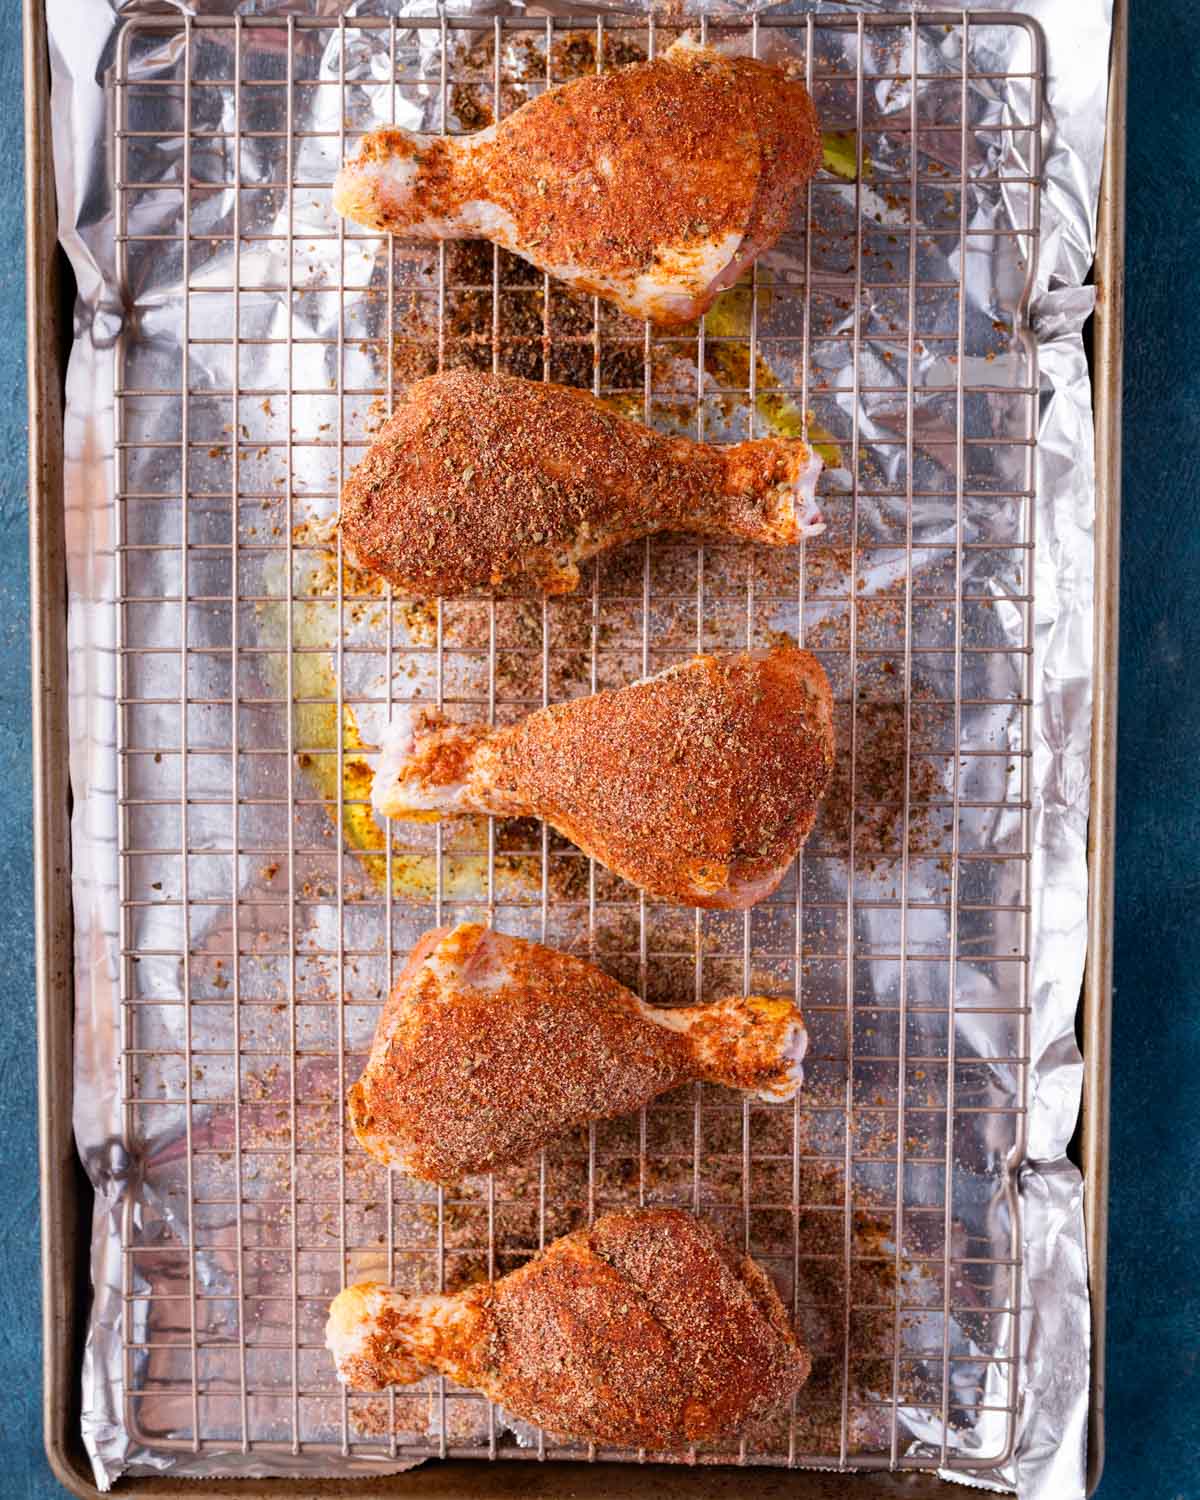 unbaked chicken legs with seasoning on a wire rack